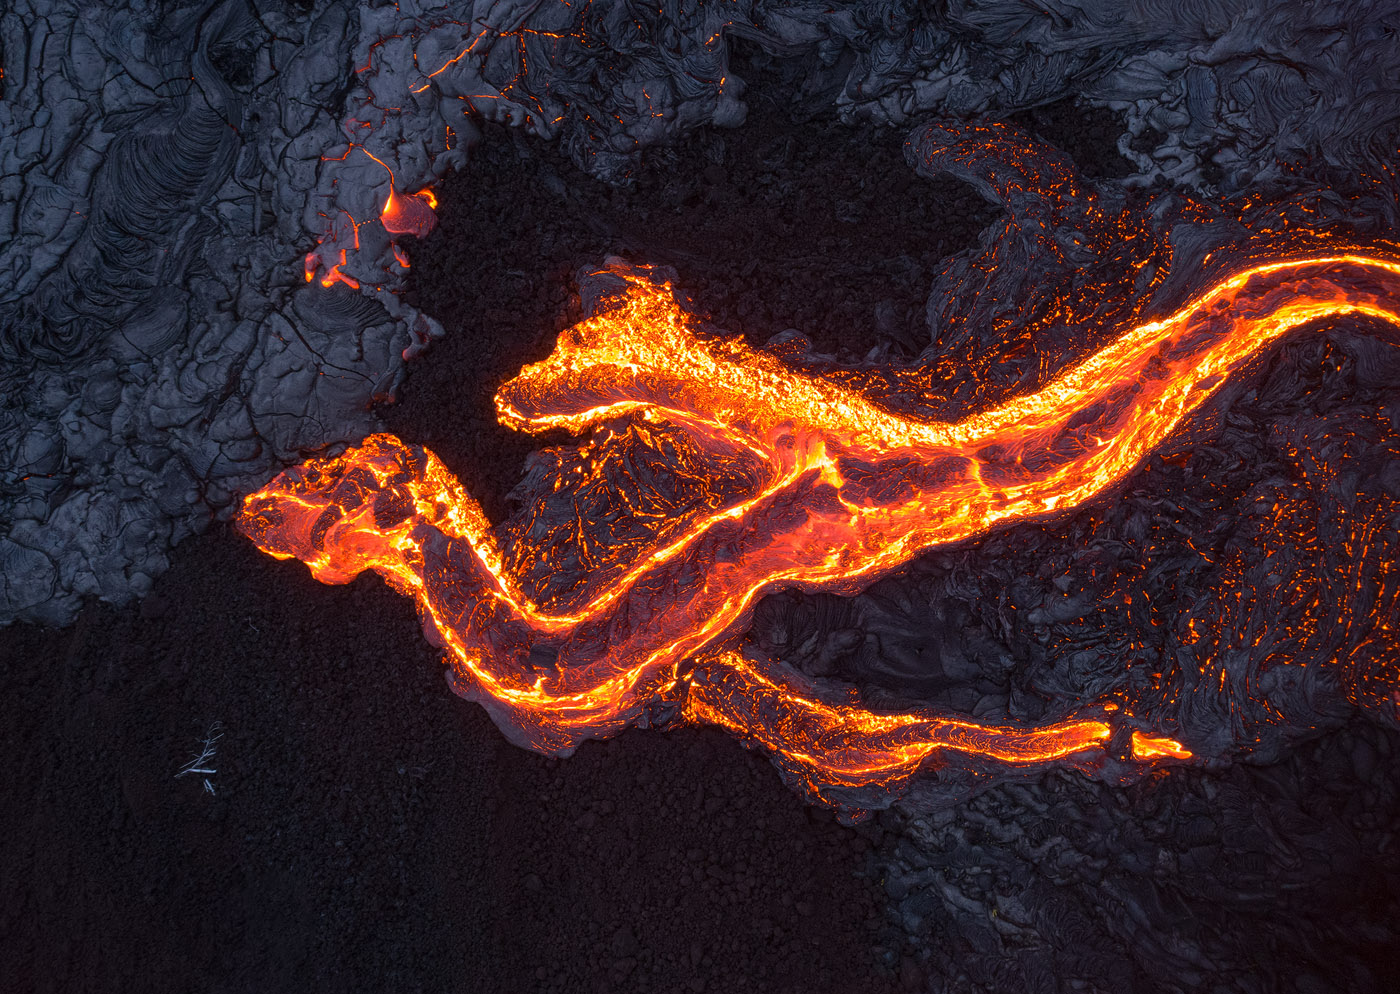 Lava flows in the shape of a double-headed dragon. During this shoot I flew my drone so close to the lava that the camera was molten (!). Needless to say, I wouldn't get this close myself. </br>DJI Phantom 4 Pro, 1/8 sec, F6.3, ISO 400. Taken outside of Volcanoes NP, Island of Hawaii.